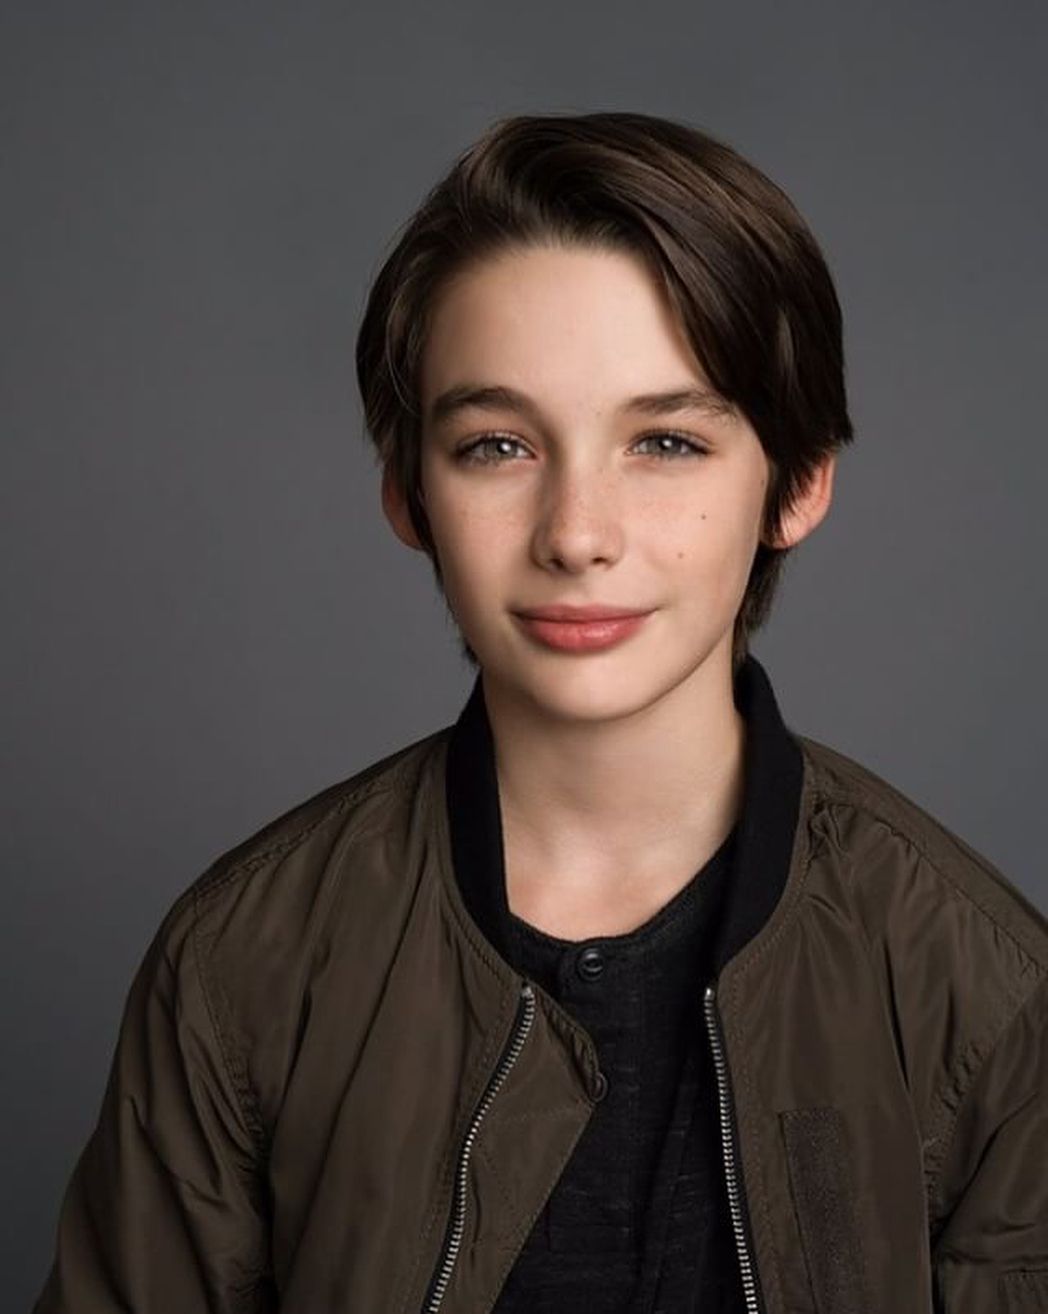 Dylan Kingwell Wiki: Age, Parents, Girlfriend, Height, Net Worth.